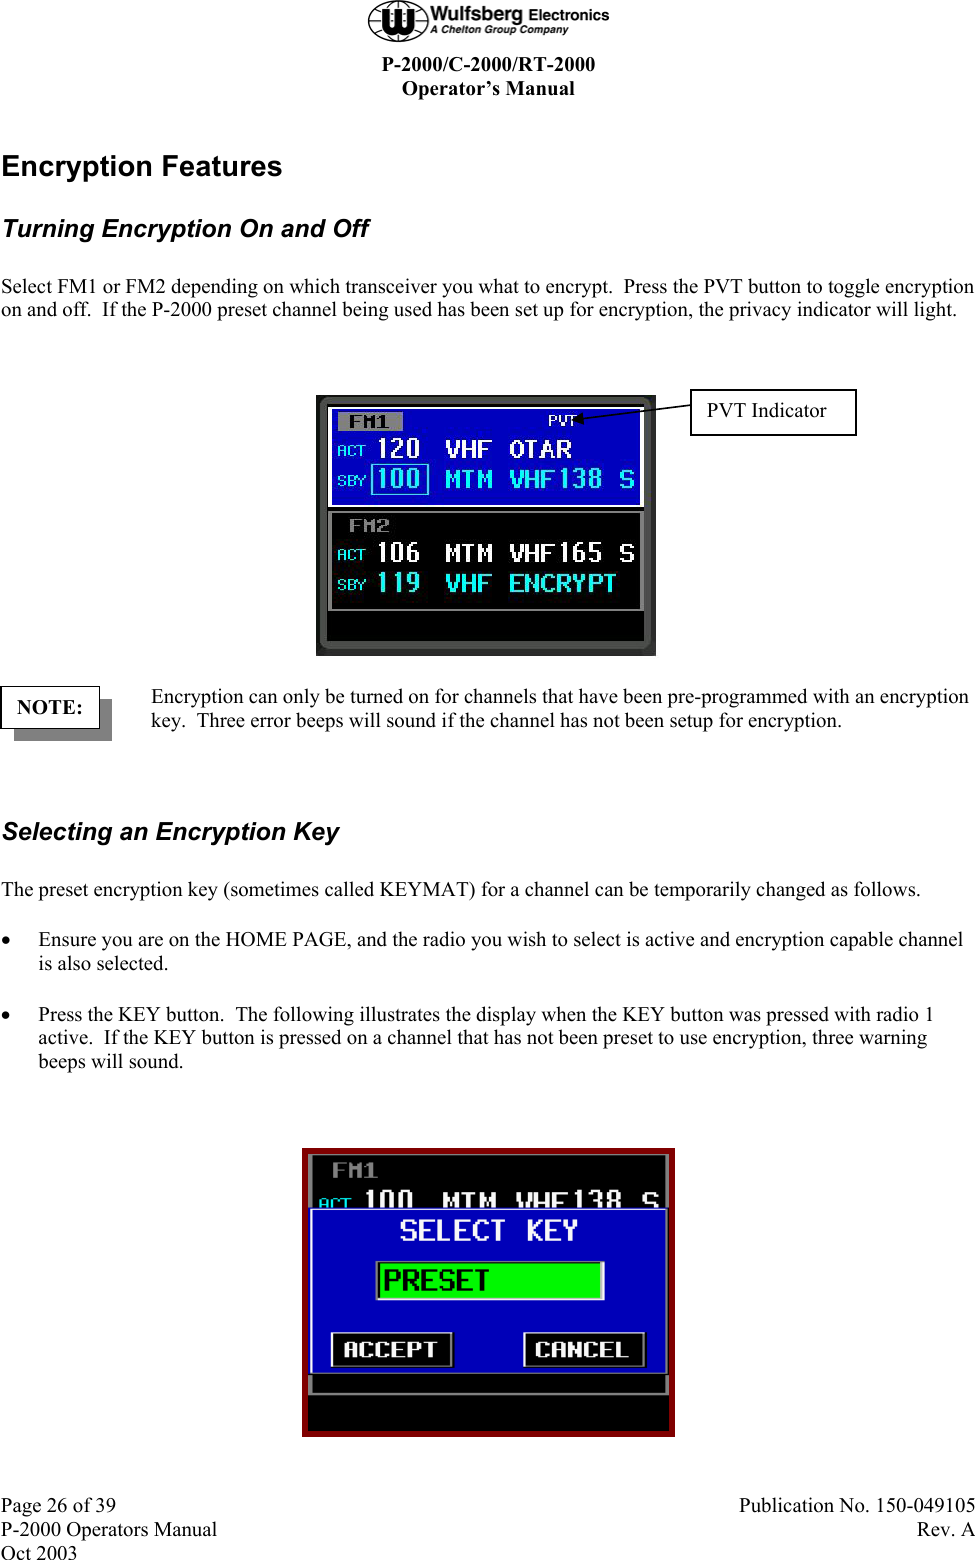  P-2000/C-2000/RT-2000 Operator’s Manual  Page 26 of 39  Publication No. 150-049105 P-2000 Operators Manual  Rev. A Oct 2003 Encryption Features Turning Encryption On and Off Select FM1 or FM2 depending on which transceiver you what to encrypt.  Press the PVT button to toggle encryption on and off.  If the P-2000 preset channel being used has been set up for encryption, the privacy indicator will light.   Encryption can only be turned on for channels that have been pre-programmed with an encryption key.  Three error beeps will sound if the channel has not been setup for encryption.  Selecting an Encryption Key The preset encryption key (sometimes called KEYMAT) for a channel can be temporarily changed as follows. • Ensure you are on the HOME PAGE, and the radio you wish to select is active and encryption capable channel is also selected. • Press the KEY button.  The following illustrates the display when the KEY button was pressed with radio 1 active.  If the KEY button is pressed on a channel that has not been preset to use encryption, three warning beeps will sound.   NOTE: PVT Indicator 